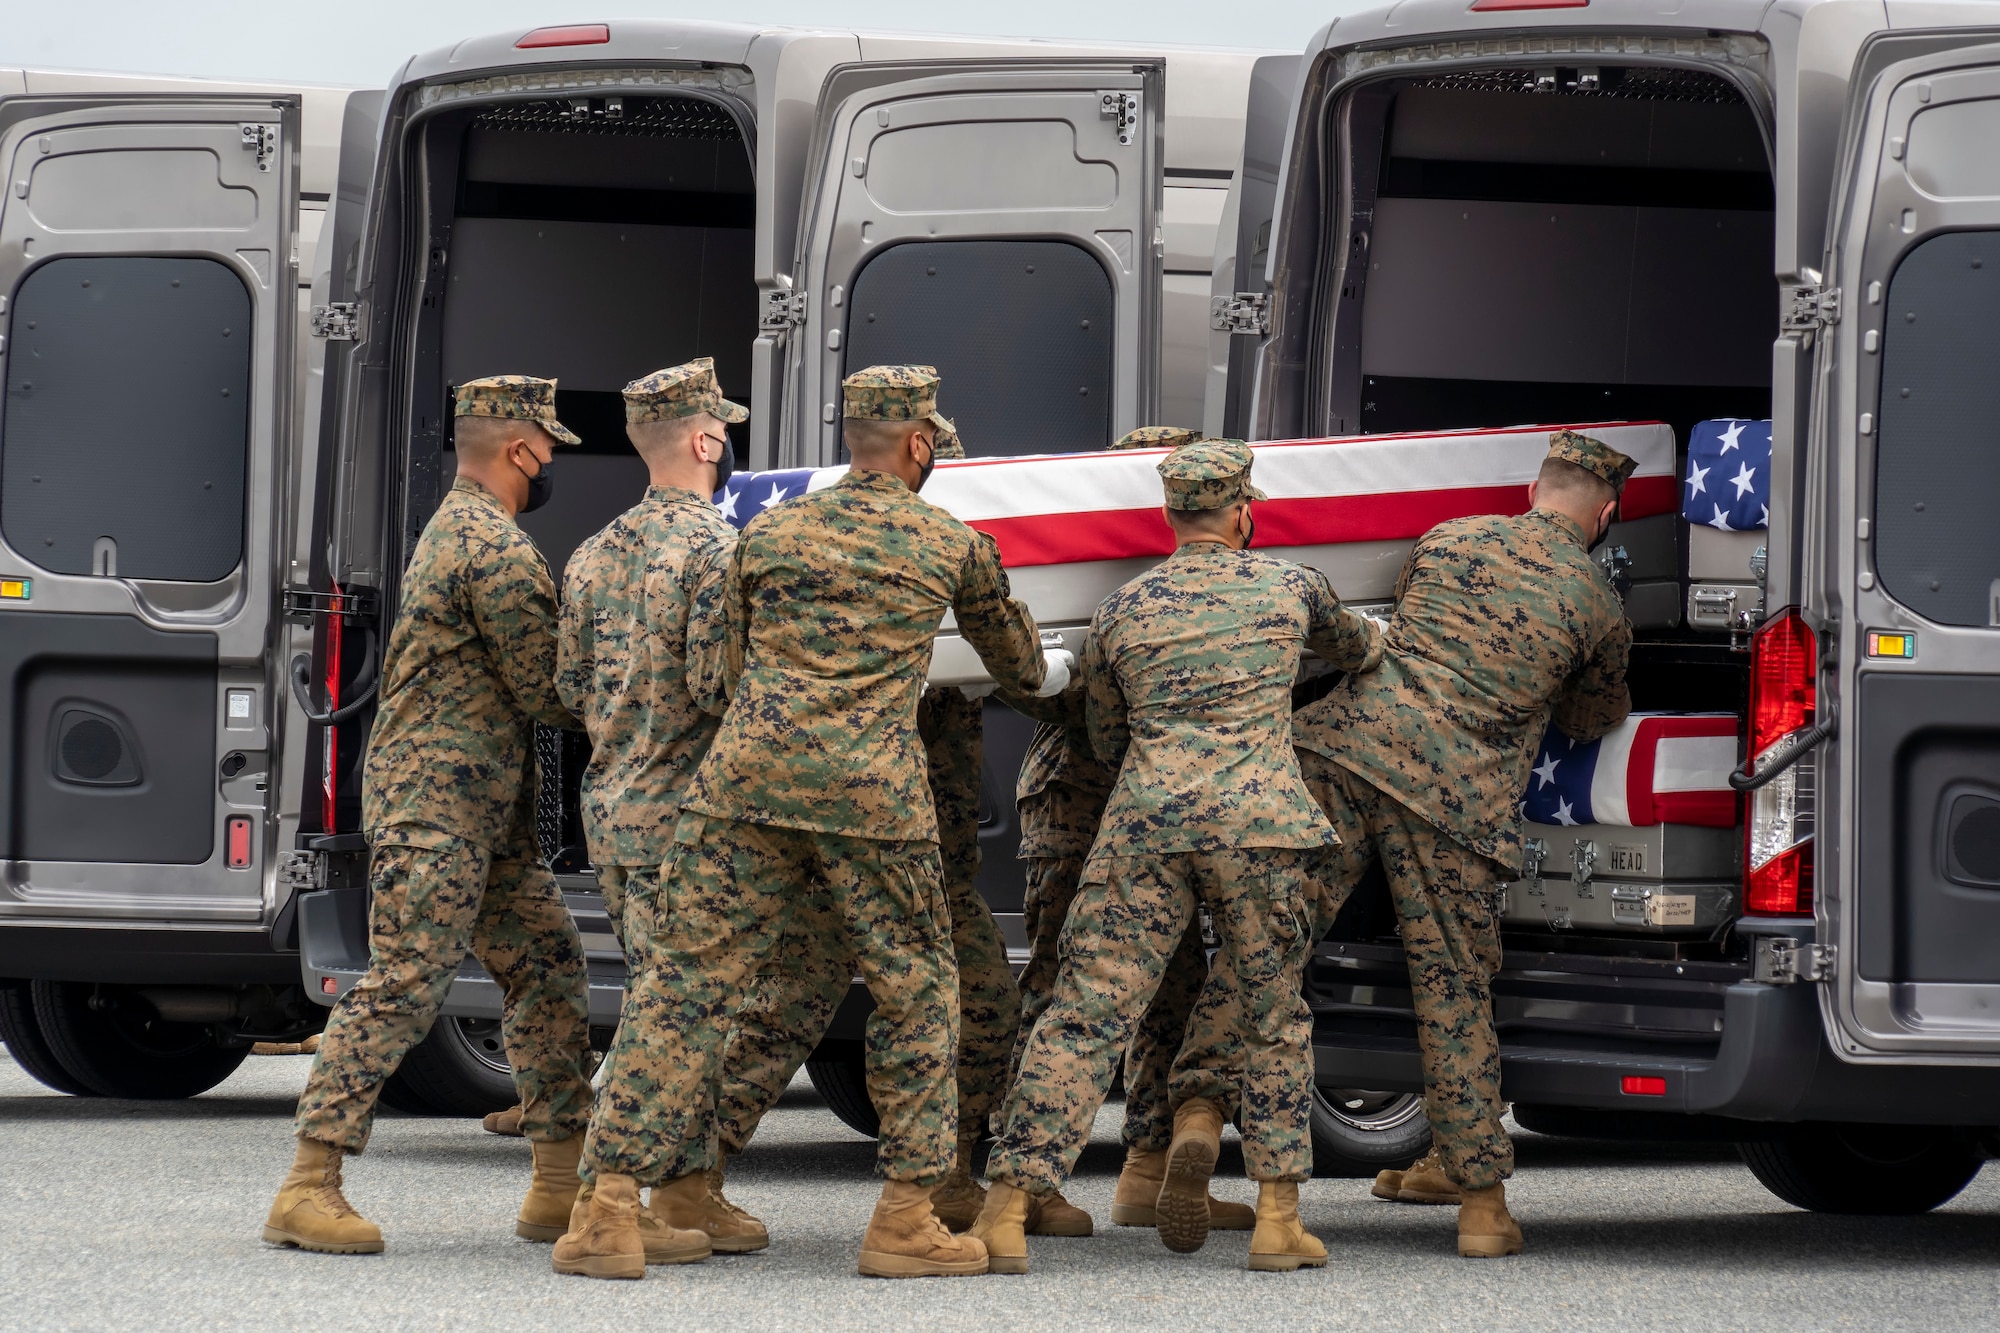 A U.S. Marine Corps carry team transfers the remains of Marine Corps Cpl. Humberto A. Sanchez of Logansport, Indiana, Aug. 29, 2021 at Dover Air Force Base, Delaware. Sanchez was assigned to 2nd Battalion, 1st Marine Regiment, 1st Marine Division, I Marine Expeditionary Force, Camp Pendleton, California. (U.S. Air Force photo by Jason Minto)